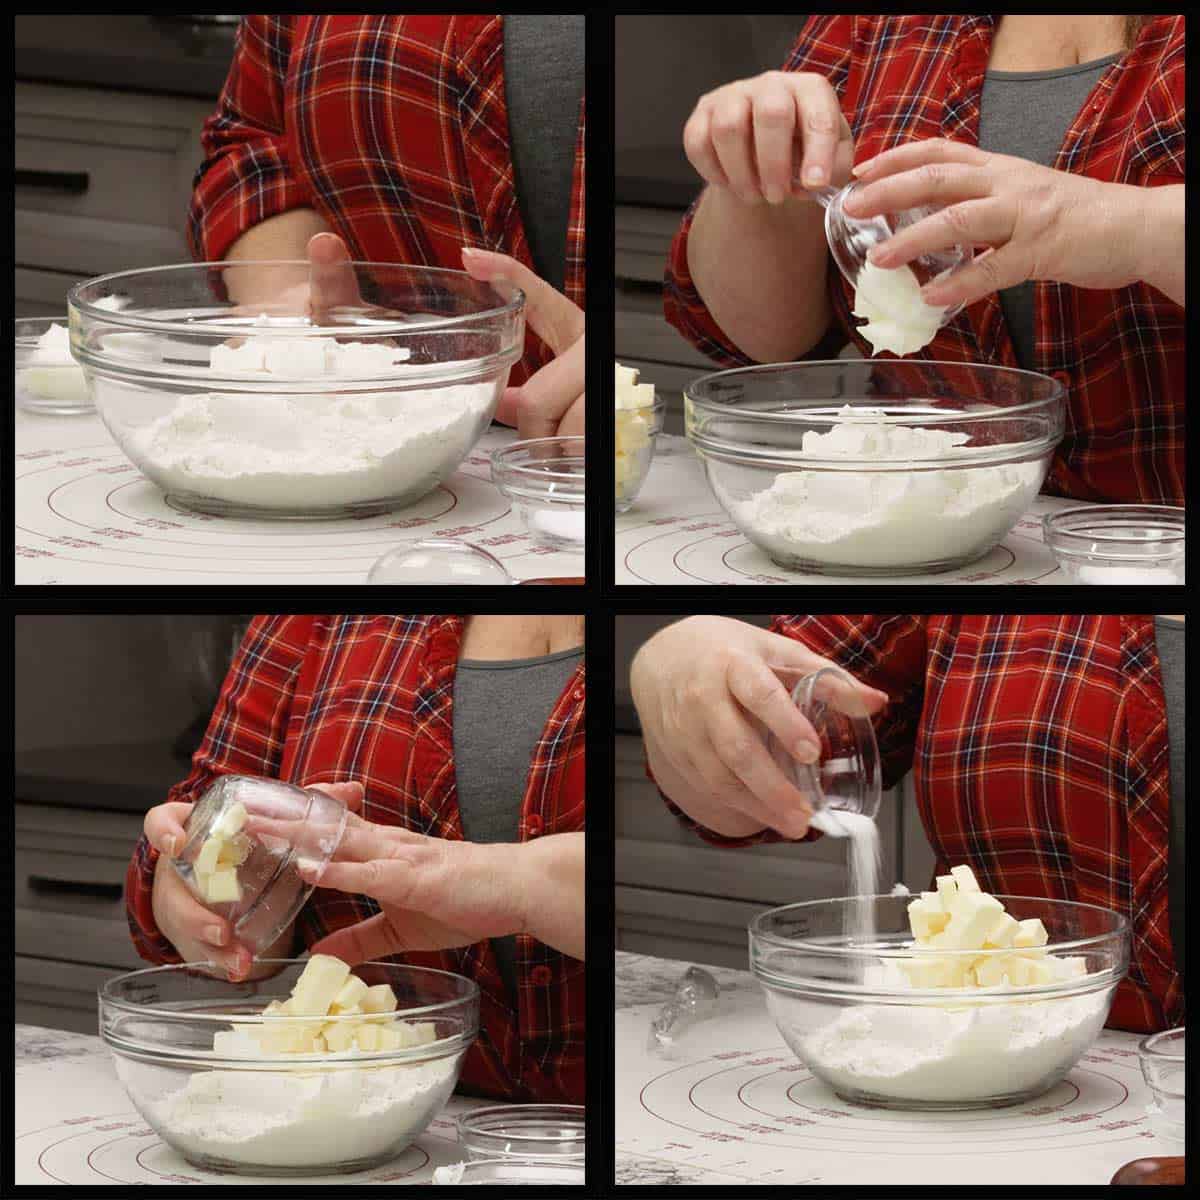 adding flour, salt, butter and lard to a large mixing bowl to make the dough for the savory hand pies.